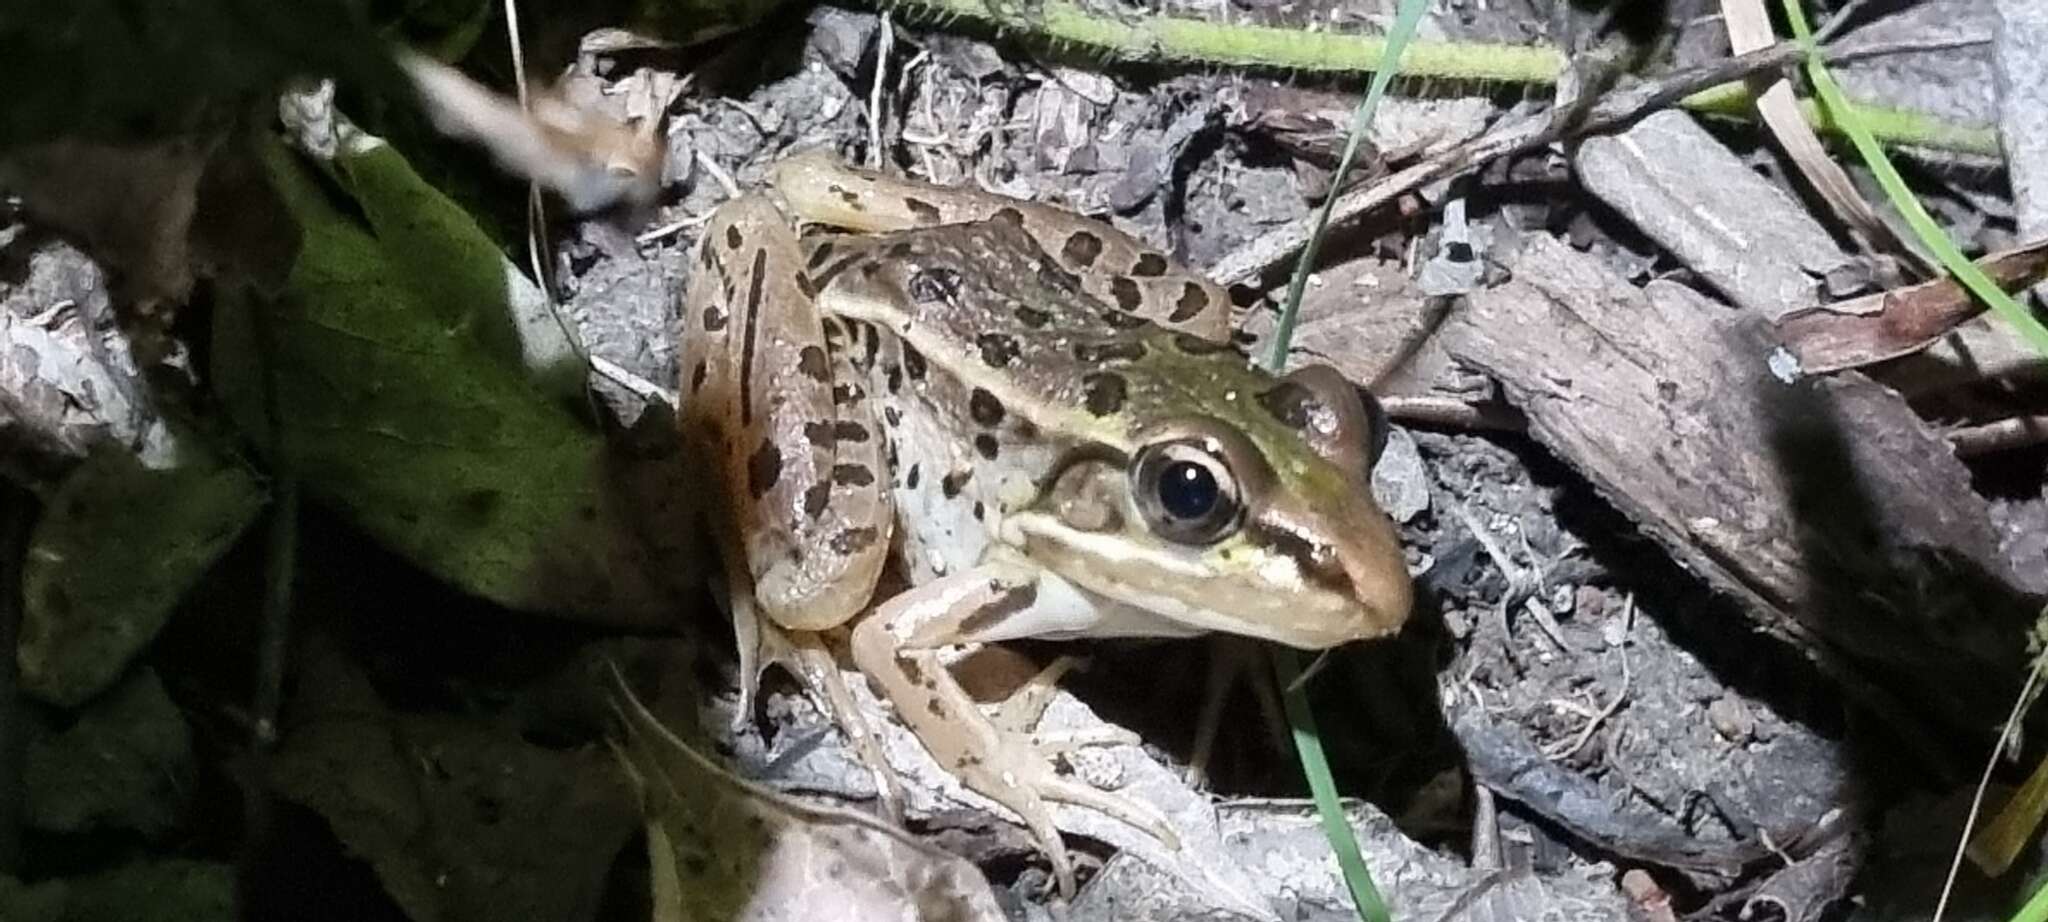 Image of Forrer's Grass Frog